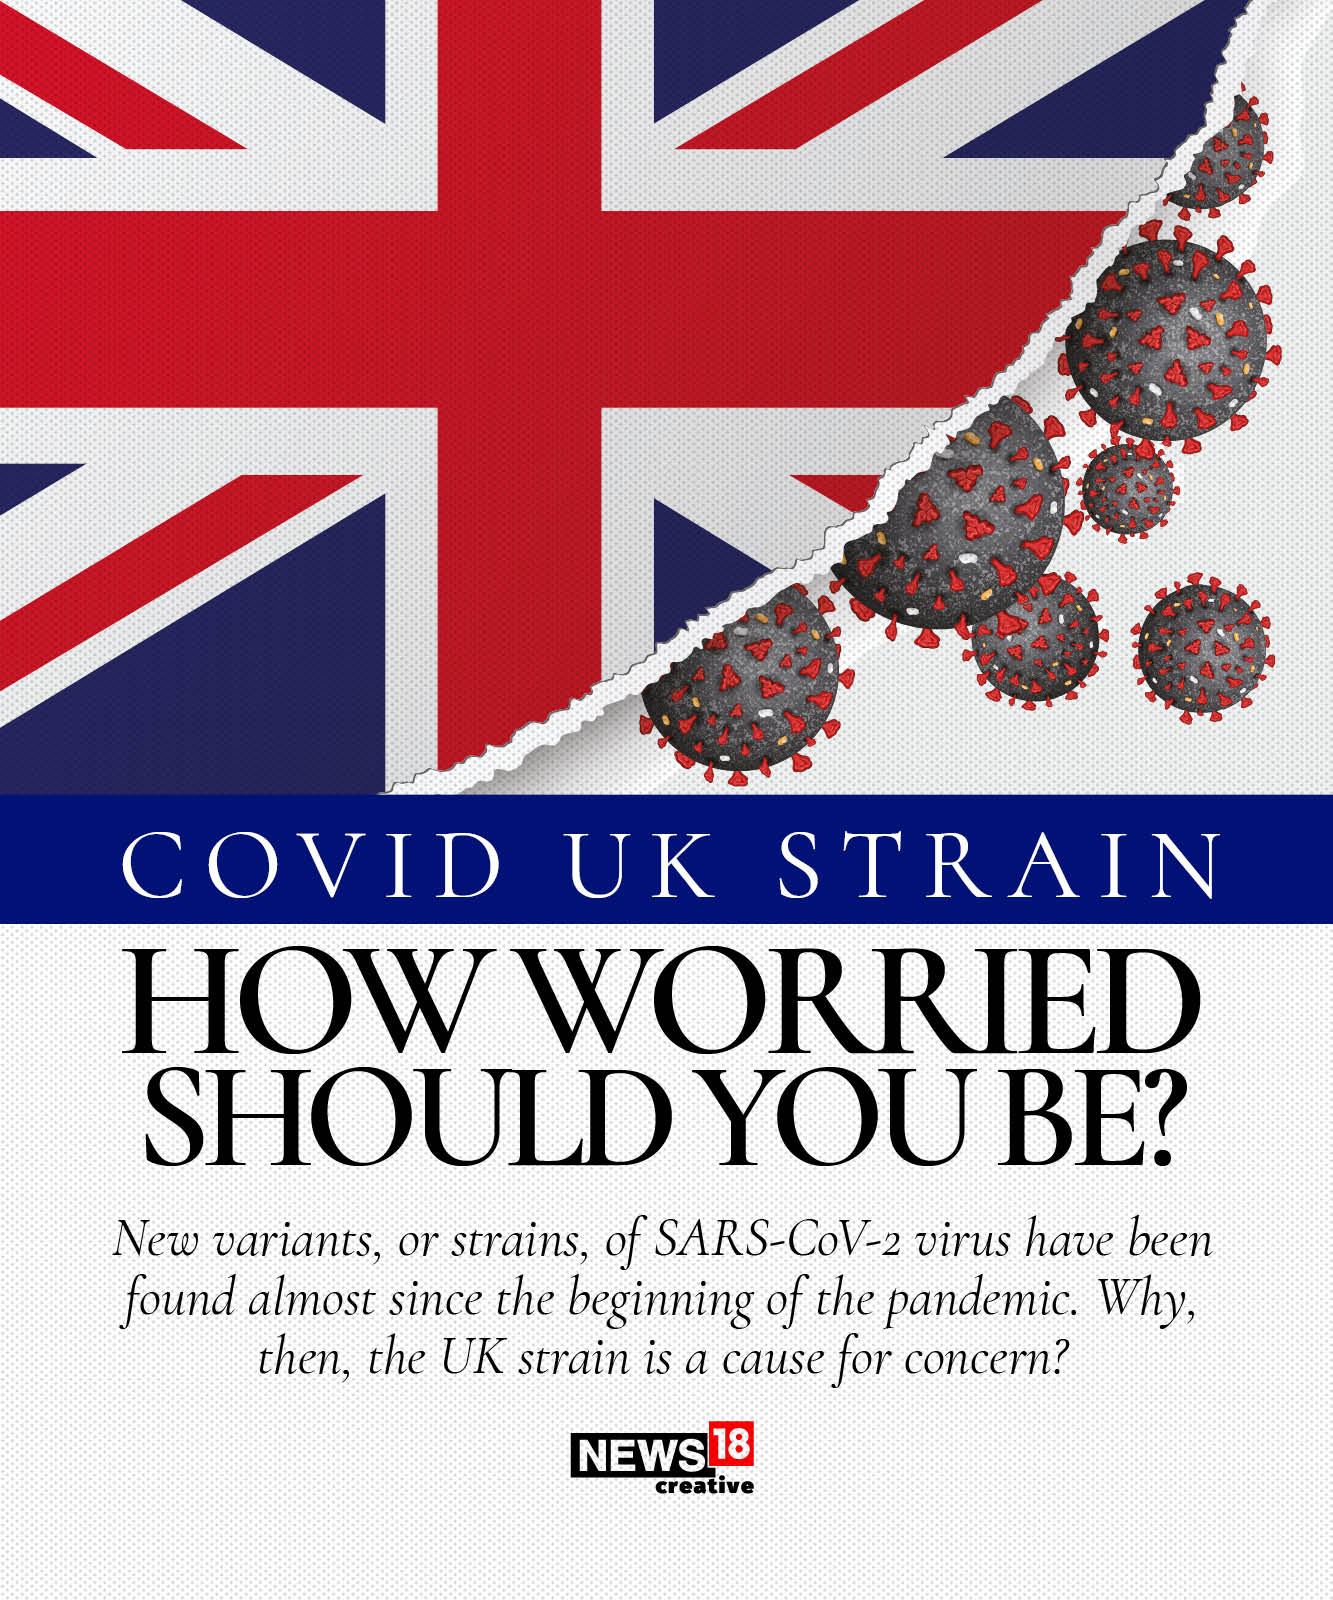 UK Covid-19 Strain: How worried should you be?